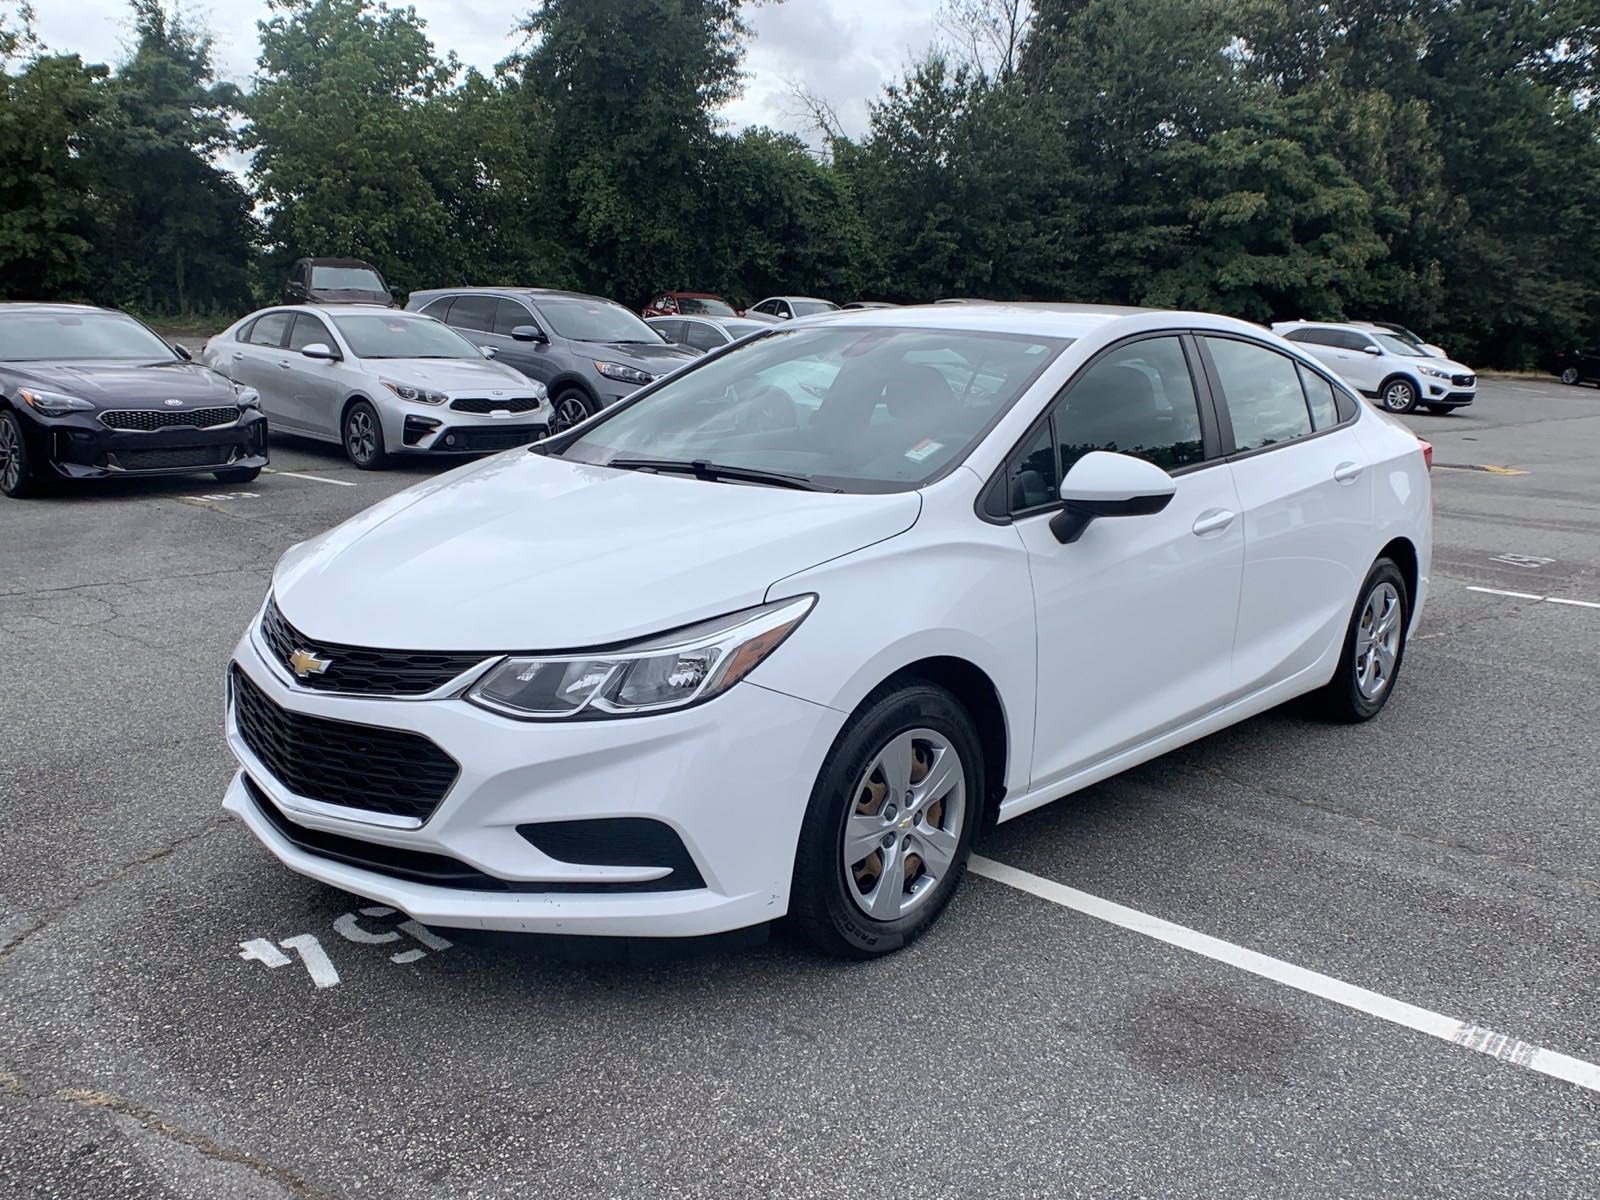 PreOwned 2017 Chevrolet Cruze LS FWD 4dr Car